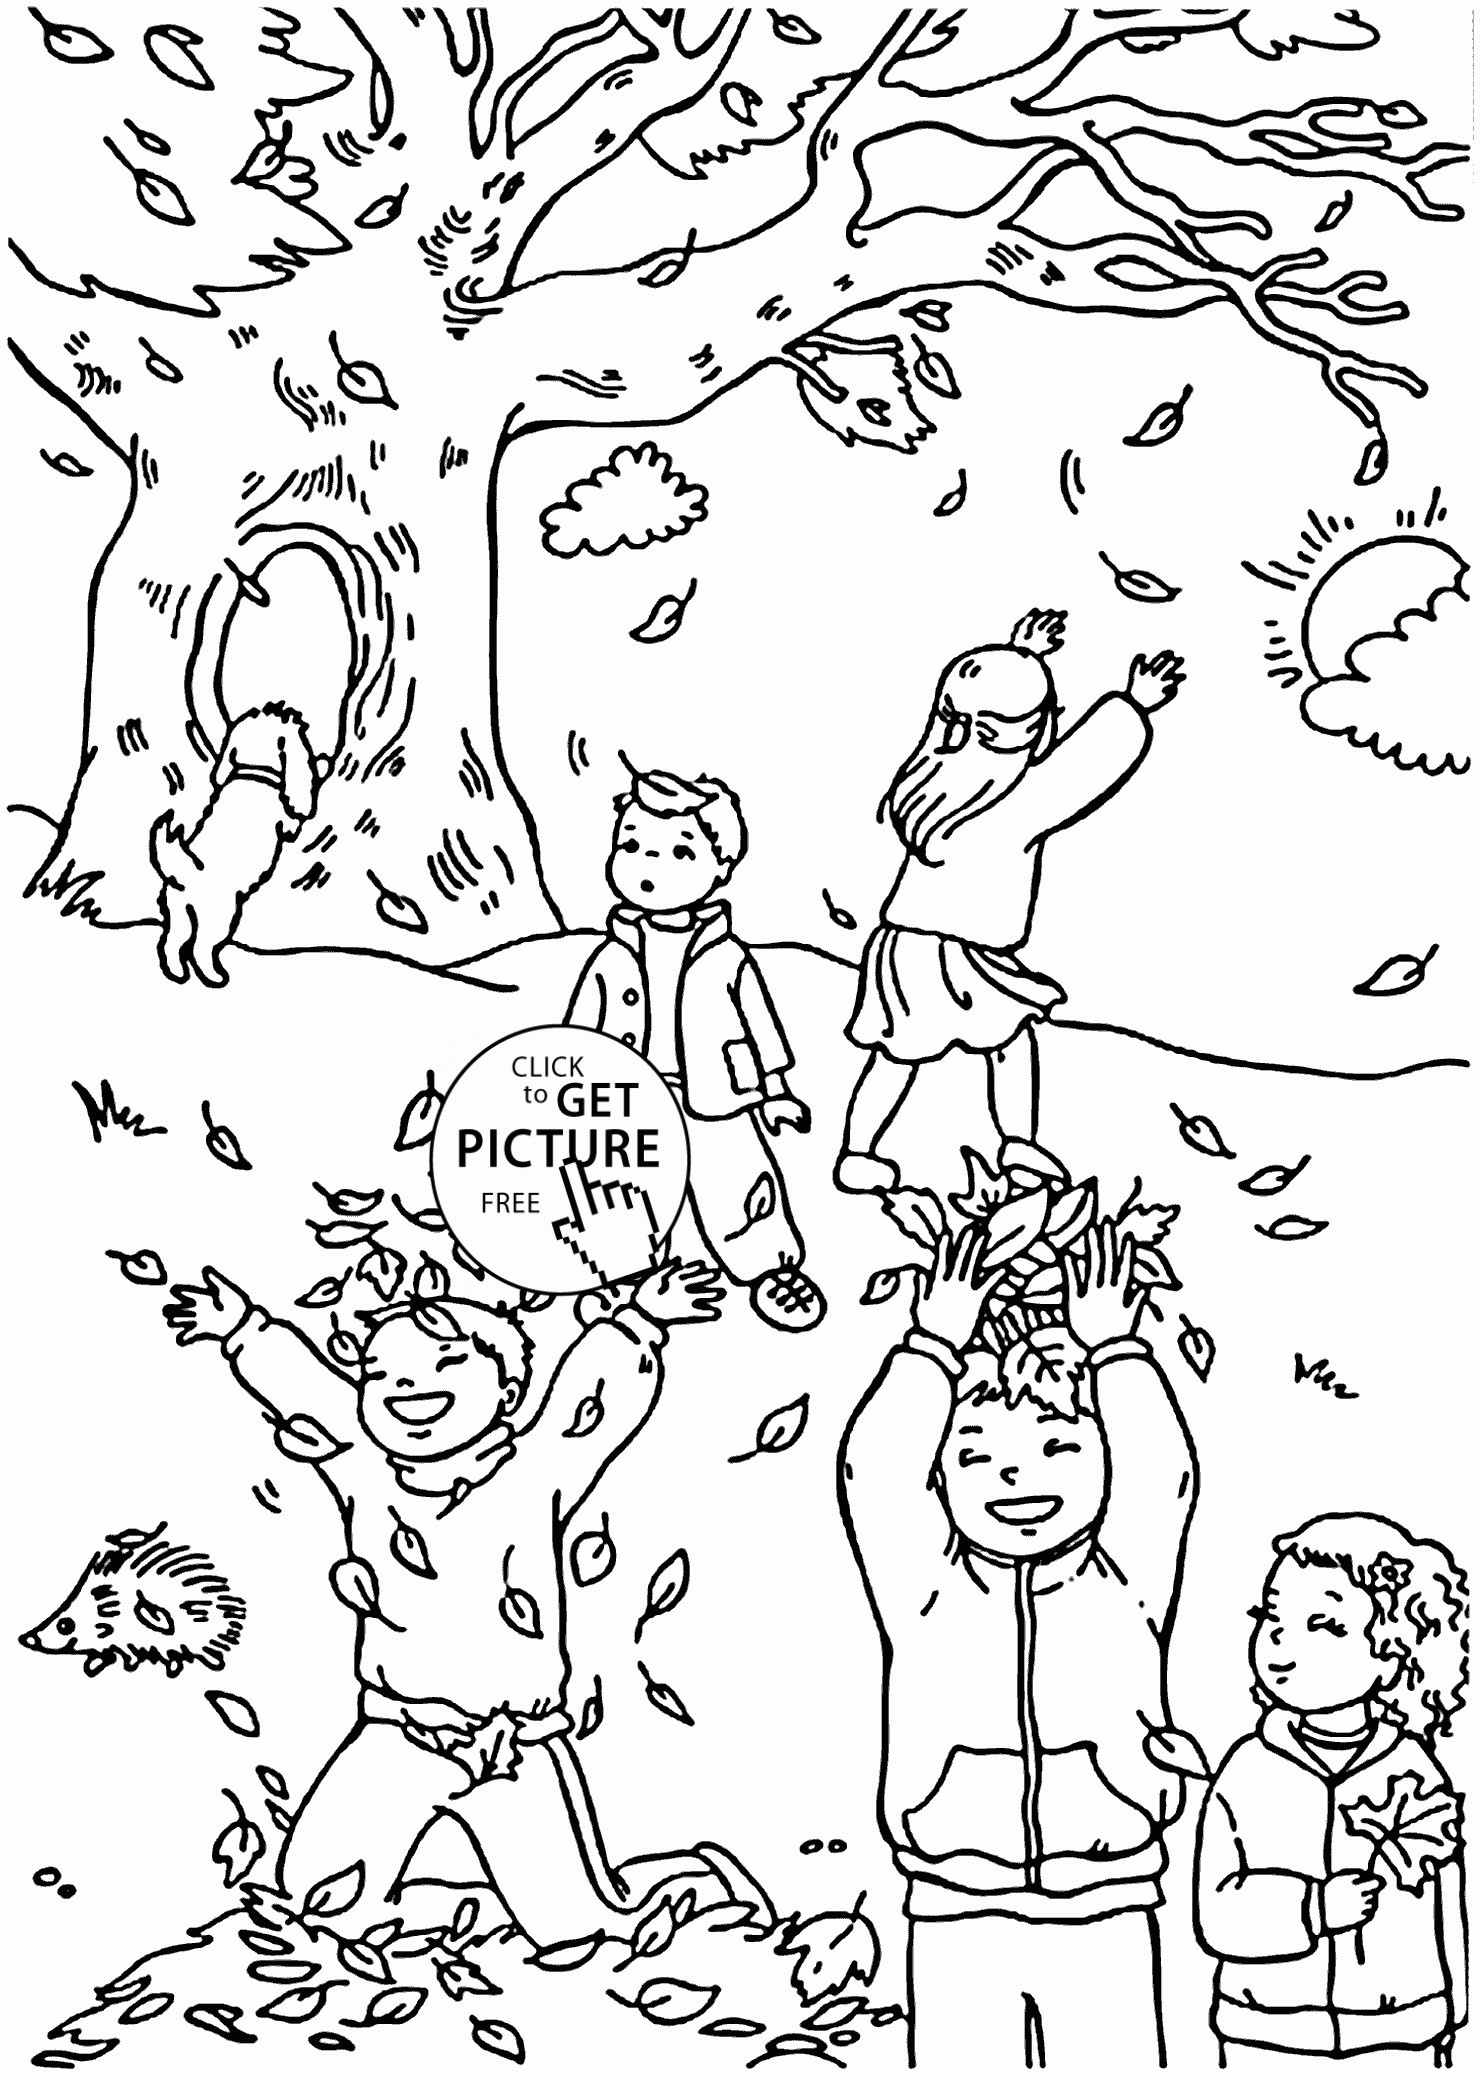 Funny Fall Coloring Pages For Kids, Autumn Leaves Printables Free - Free Printable Coloring Pages Fall Season